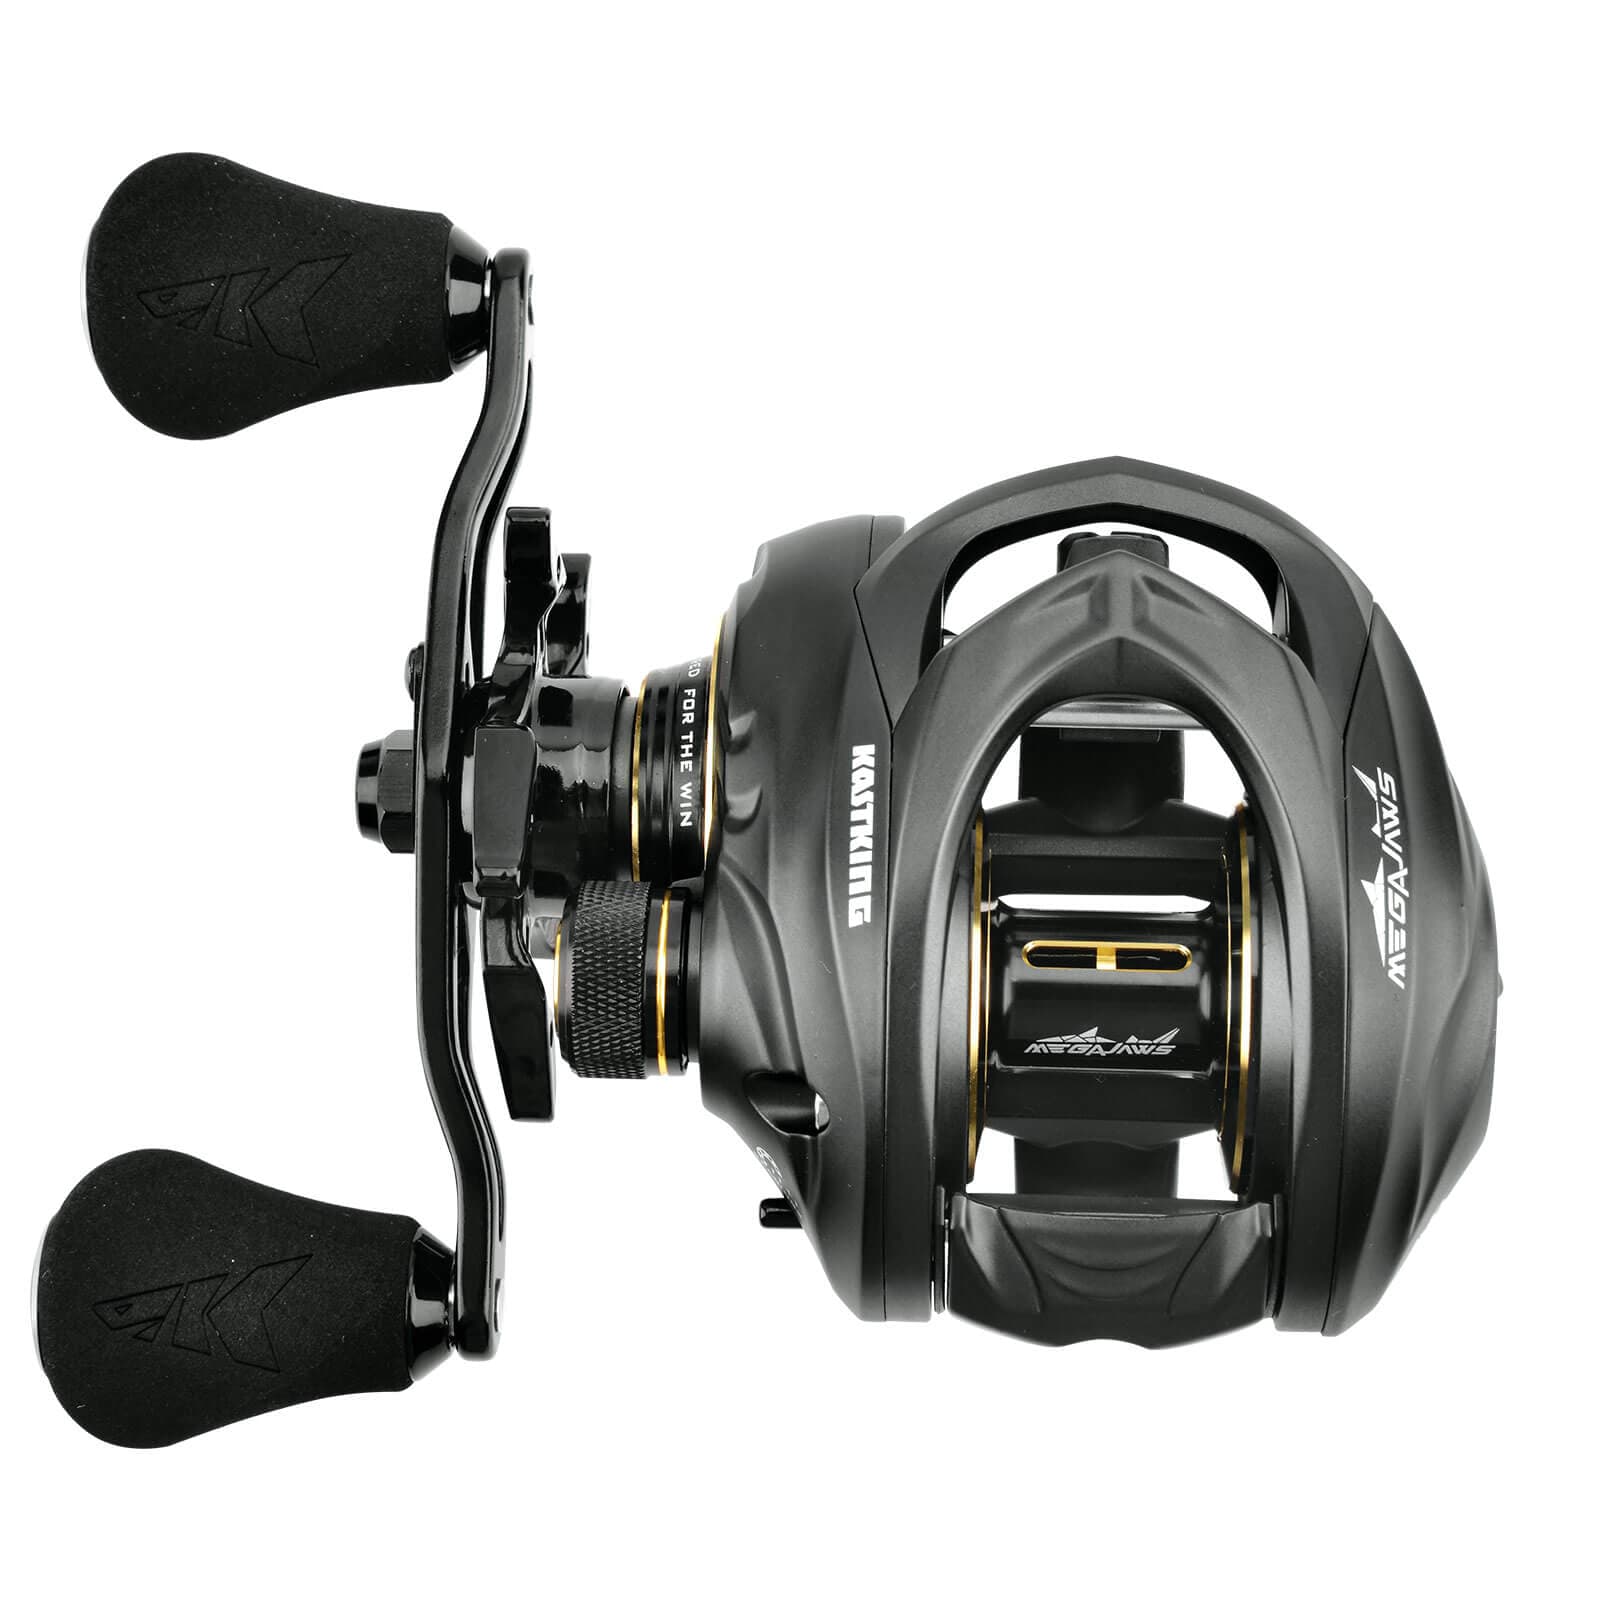 It's back!! Trade Up to The Best and GET $40 OFF! Trade in your old Baitcasting  Reel and get $40 off on our best baitcaster, the KastKing Bassinator, By KastKing